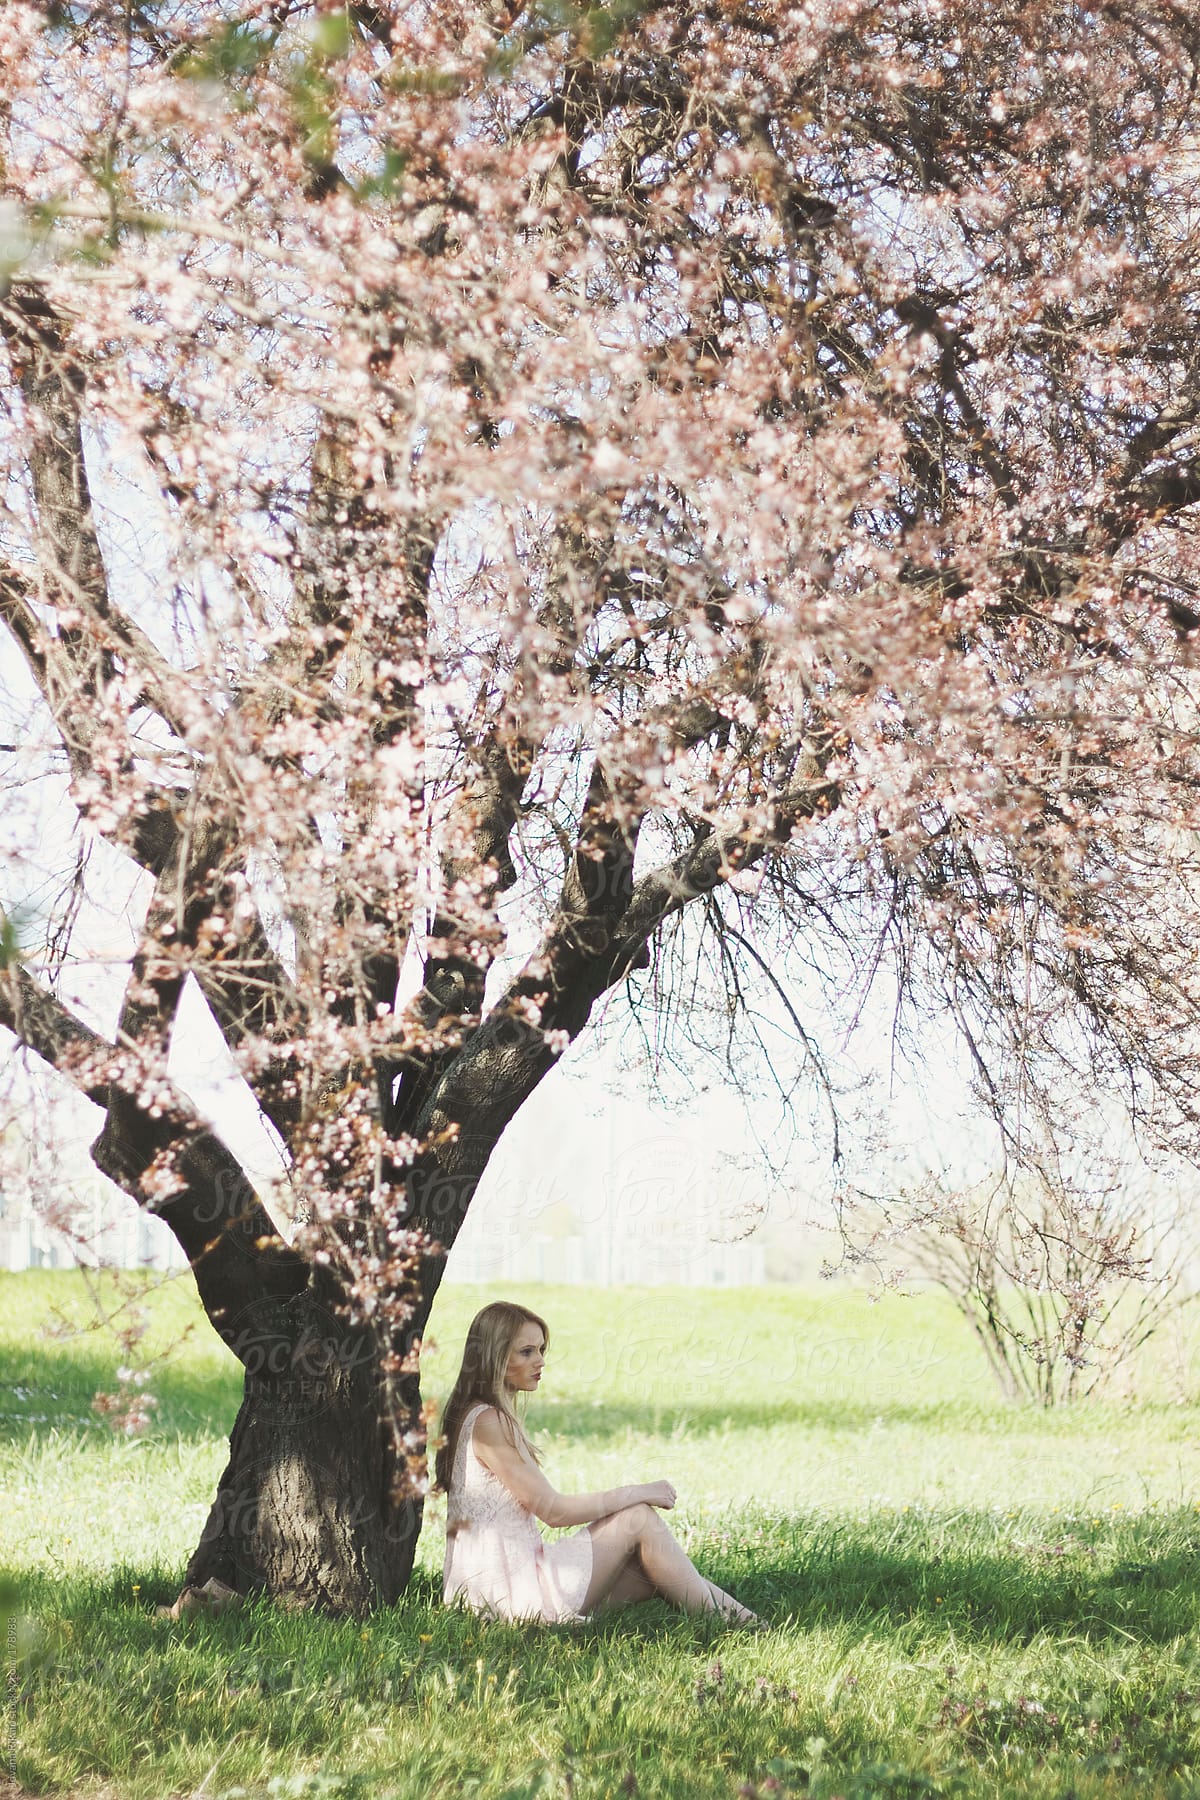 Young woman sitting under a big cherry blossom tree